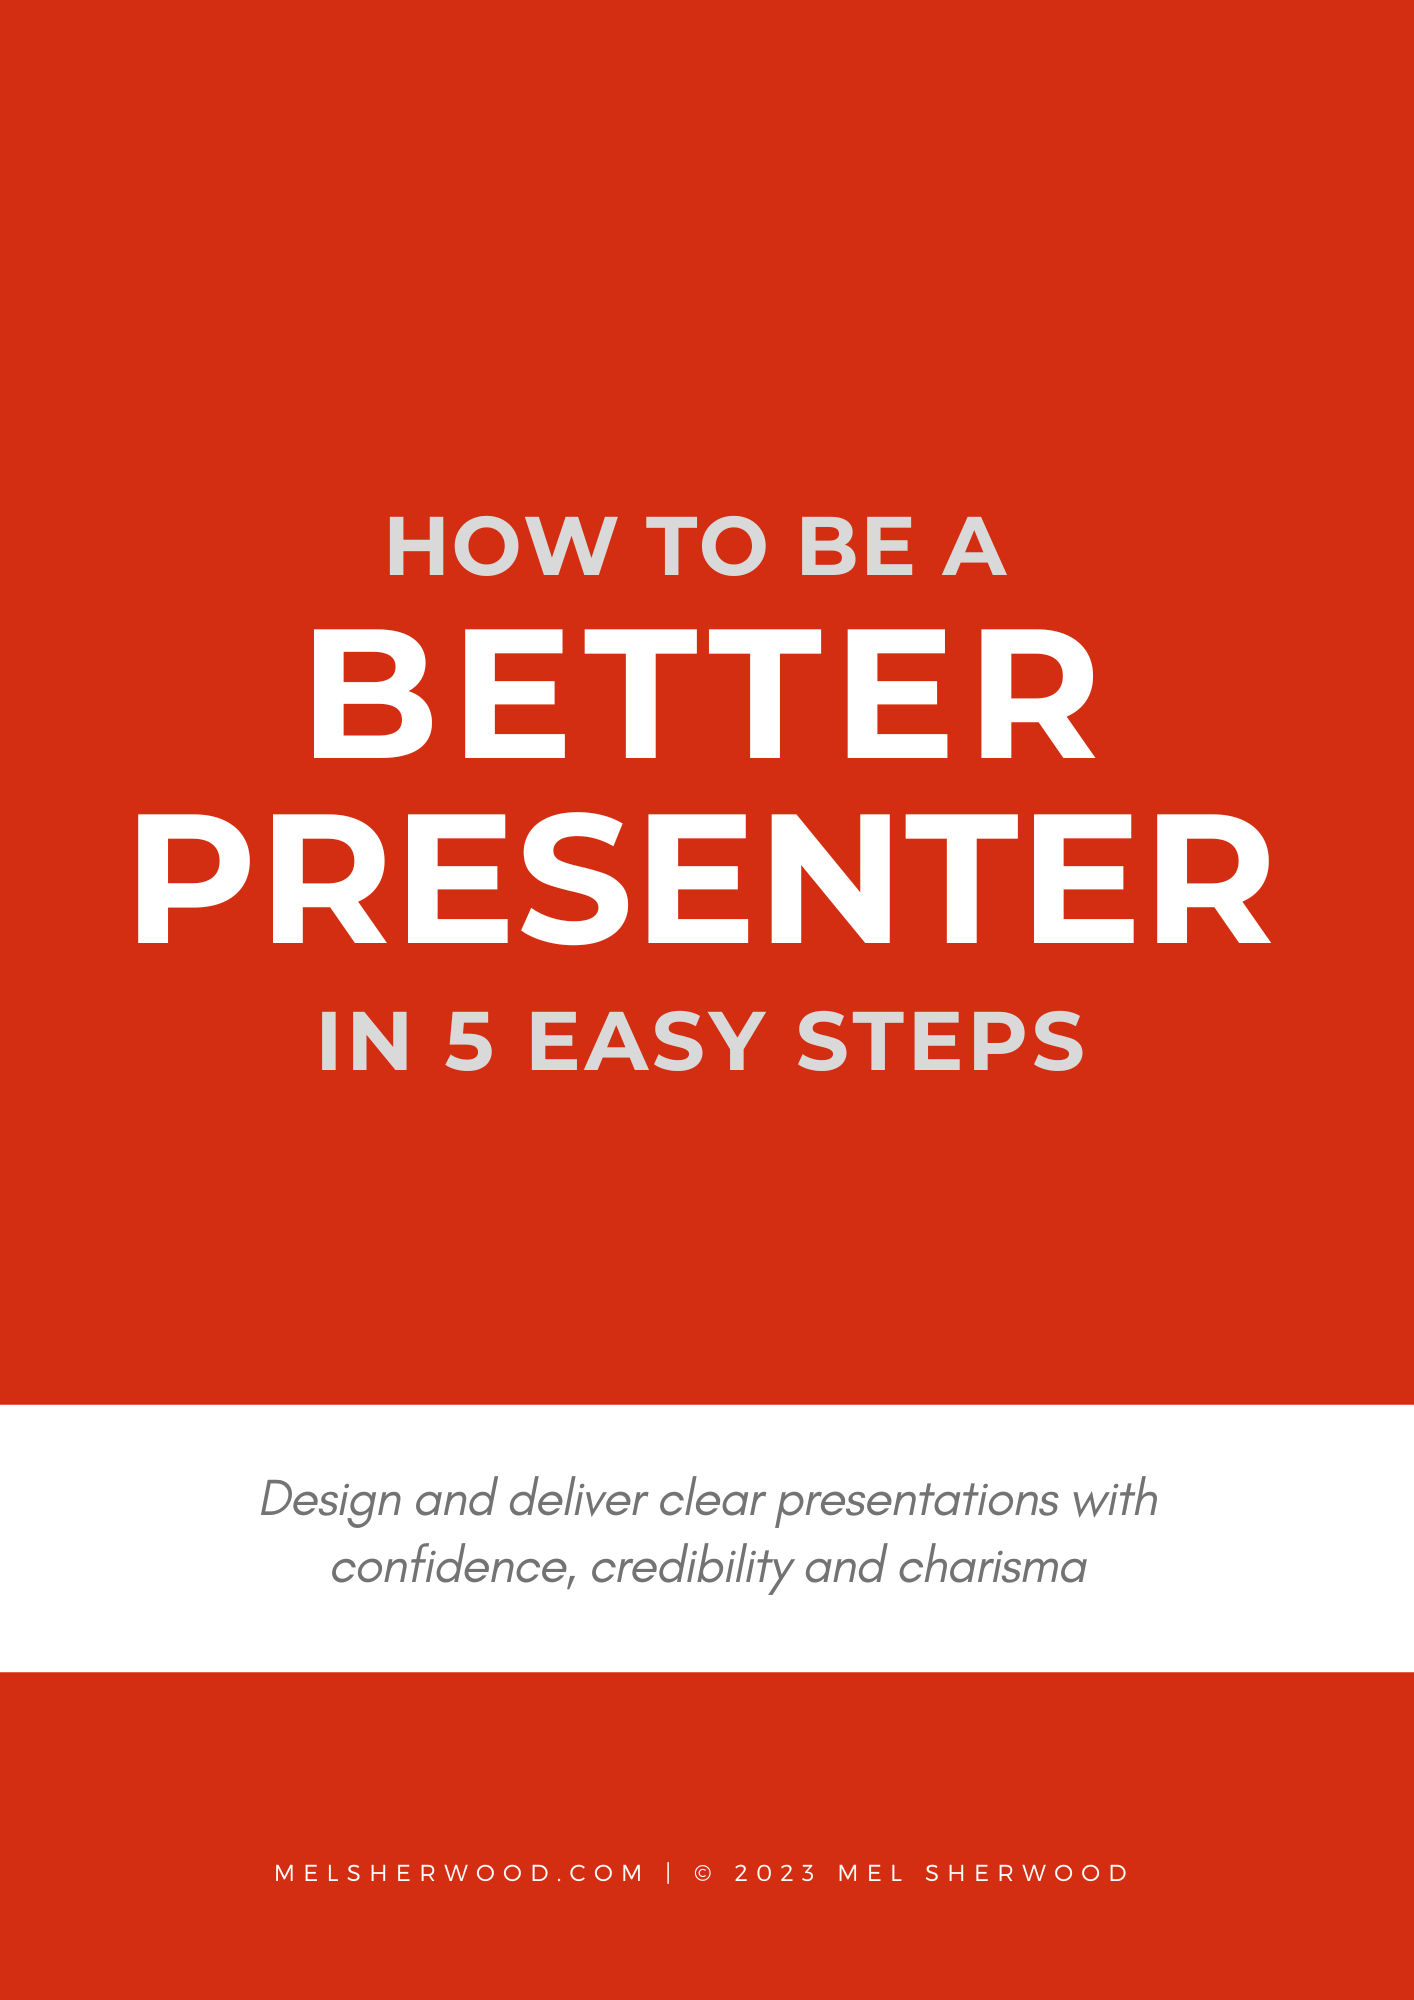 How to be a Better Presenter in 5 easy steps